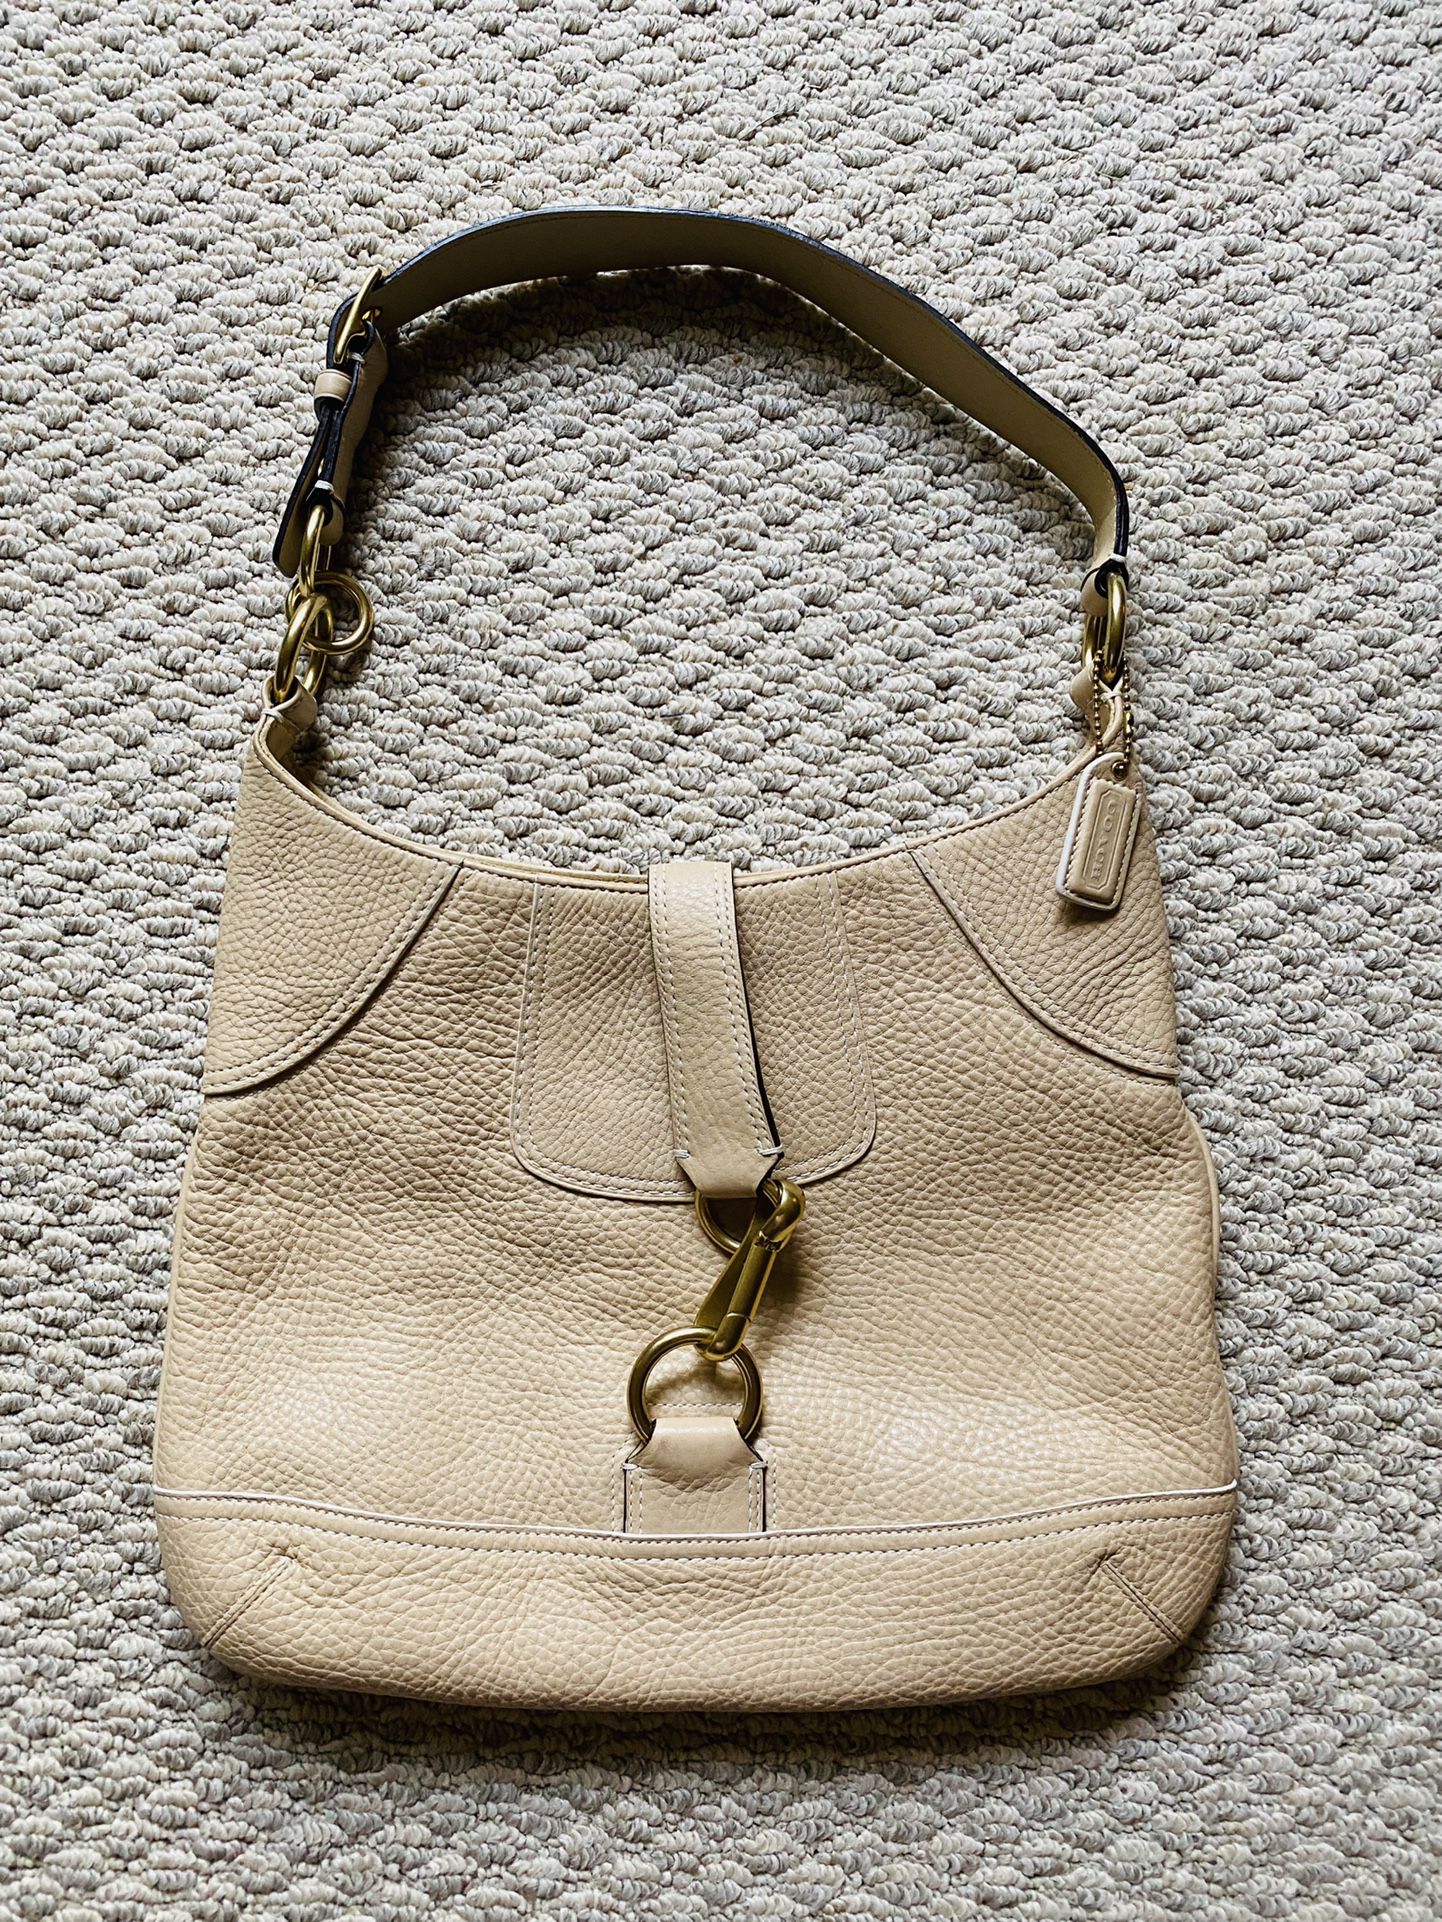 Coach Hamptons Tan Pebble Leather Hobo Shoulder Bag #A0(contact info removed)0